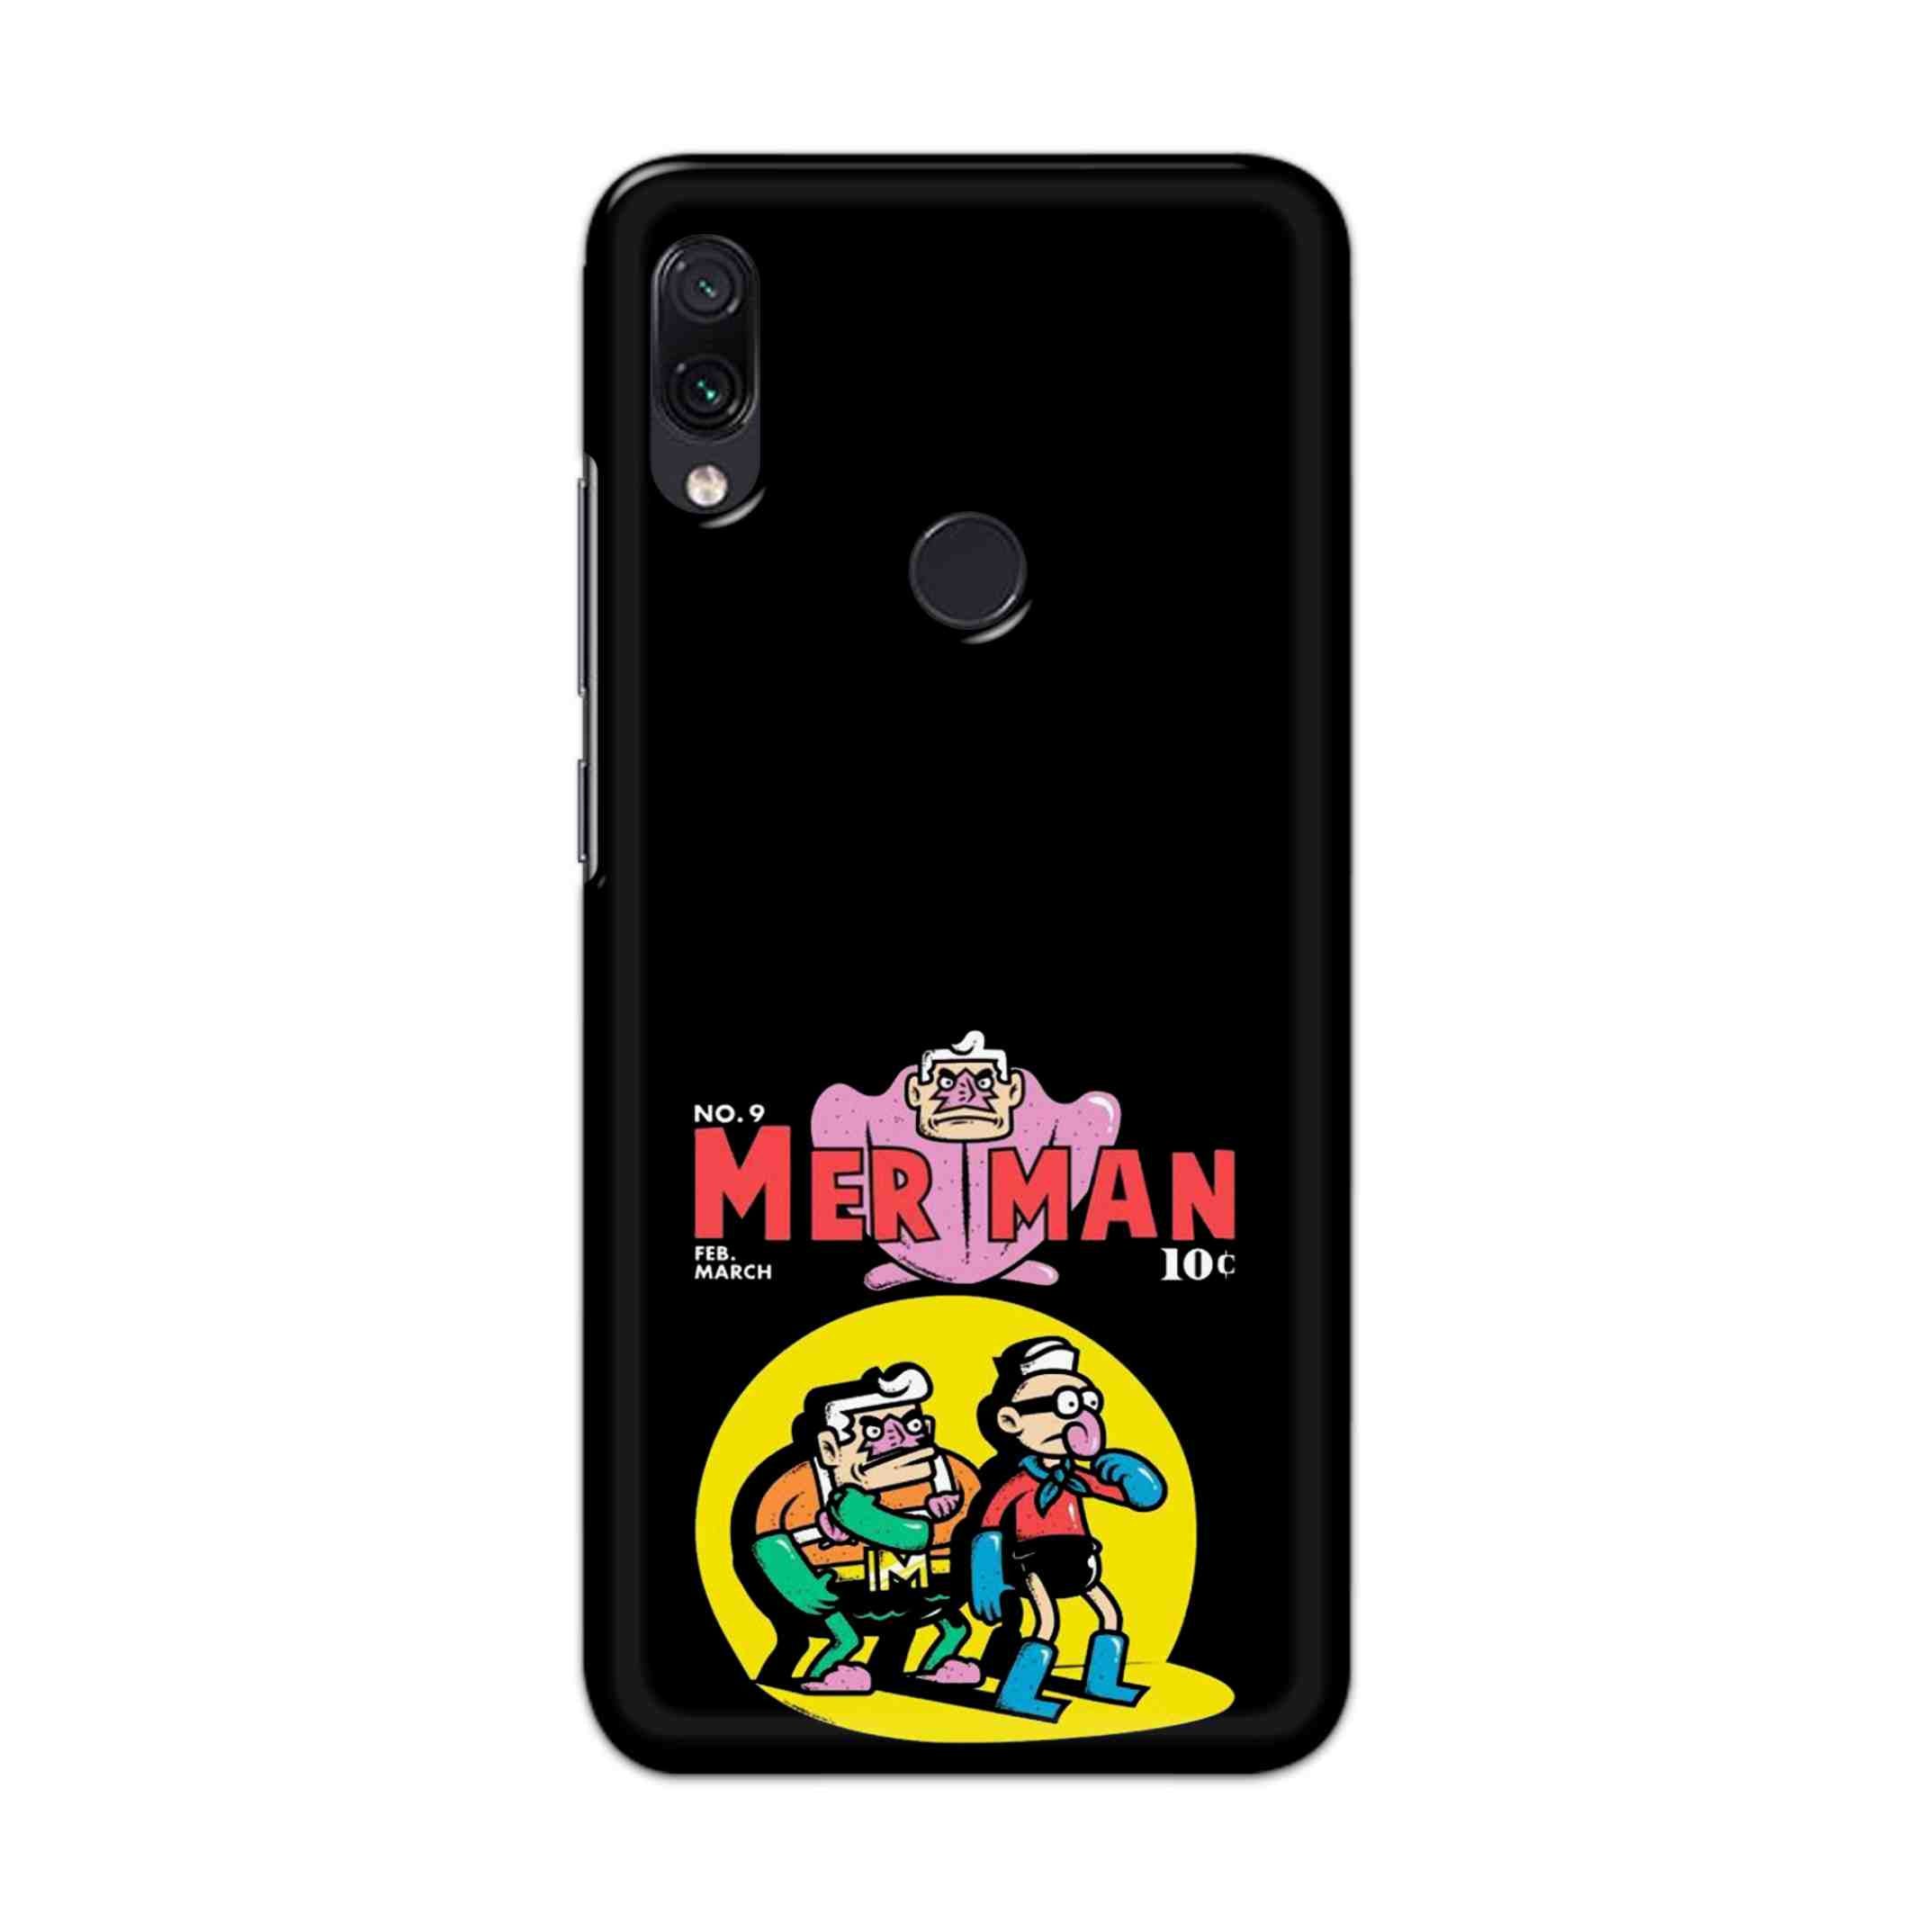 Buy Merman Hard Back Mobile Phone Case Cover For Redmi Note 7 / Note 7 Pro Online